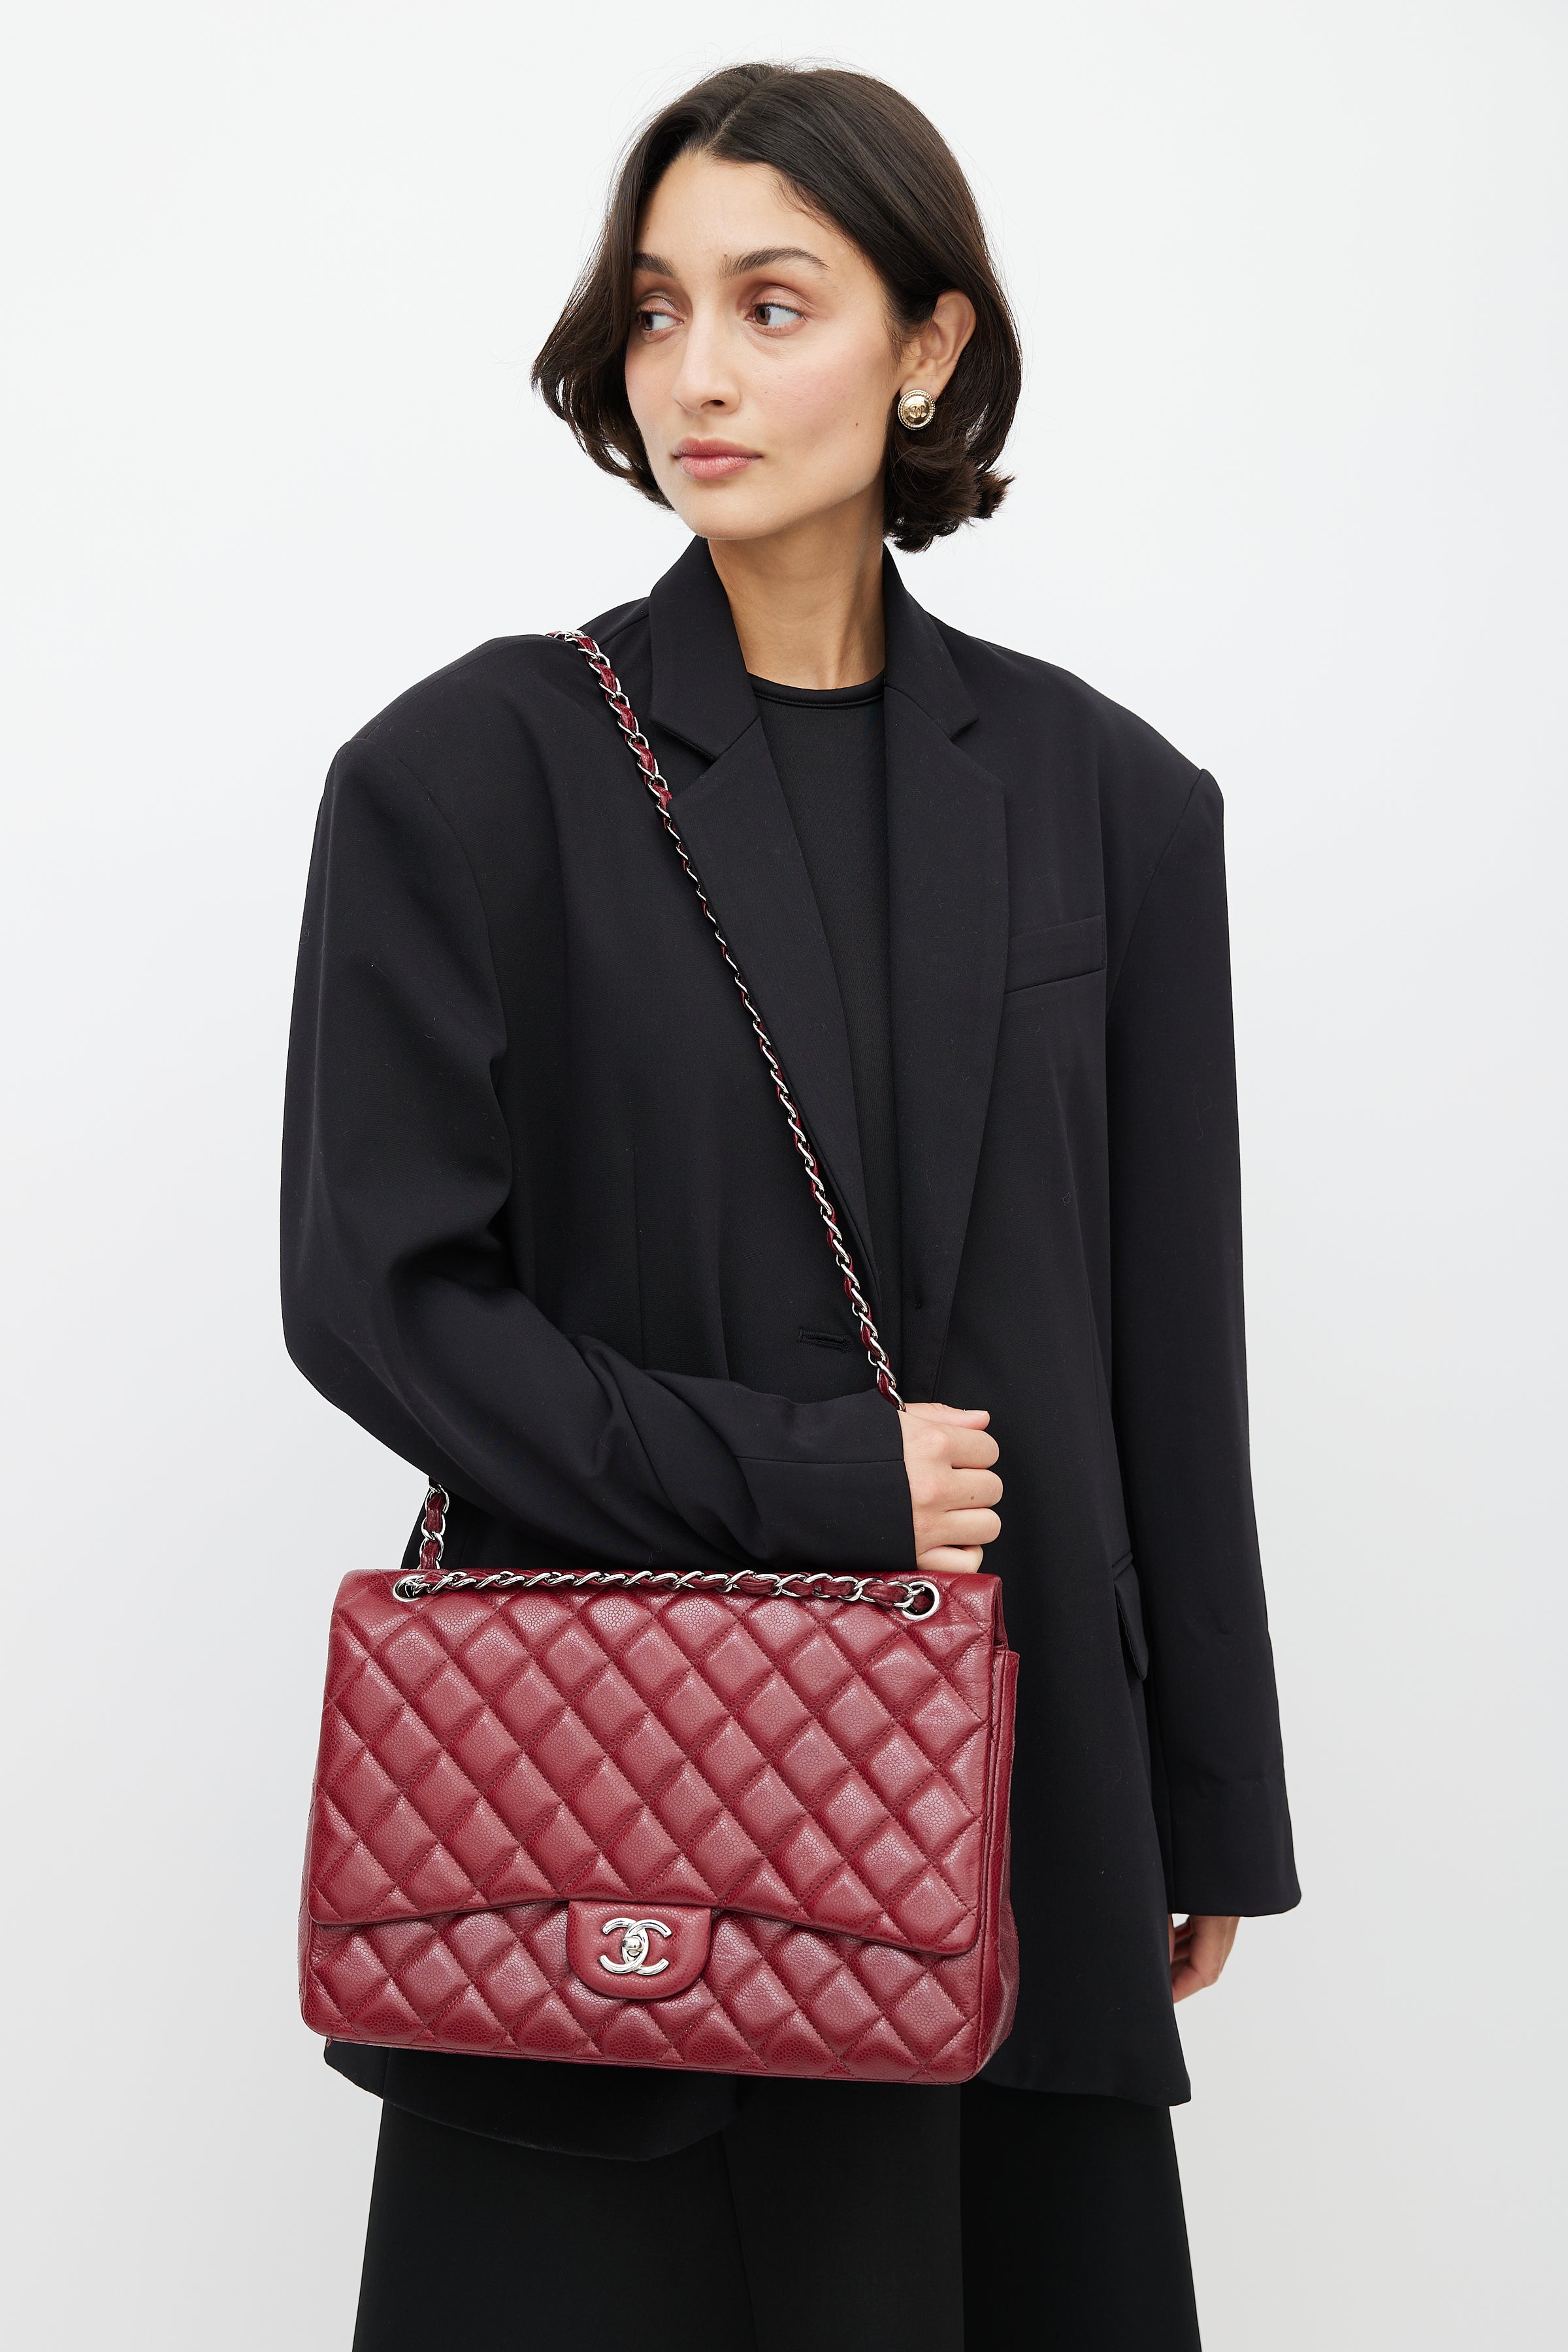 Chanel Burgundy Quilted Lambskin Classic Flap Bag Gold Hardware Available  For Immediate Sale At Sotheby's